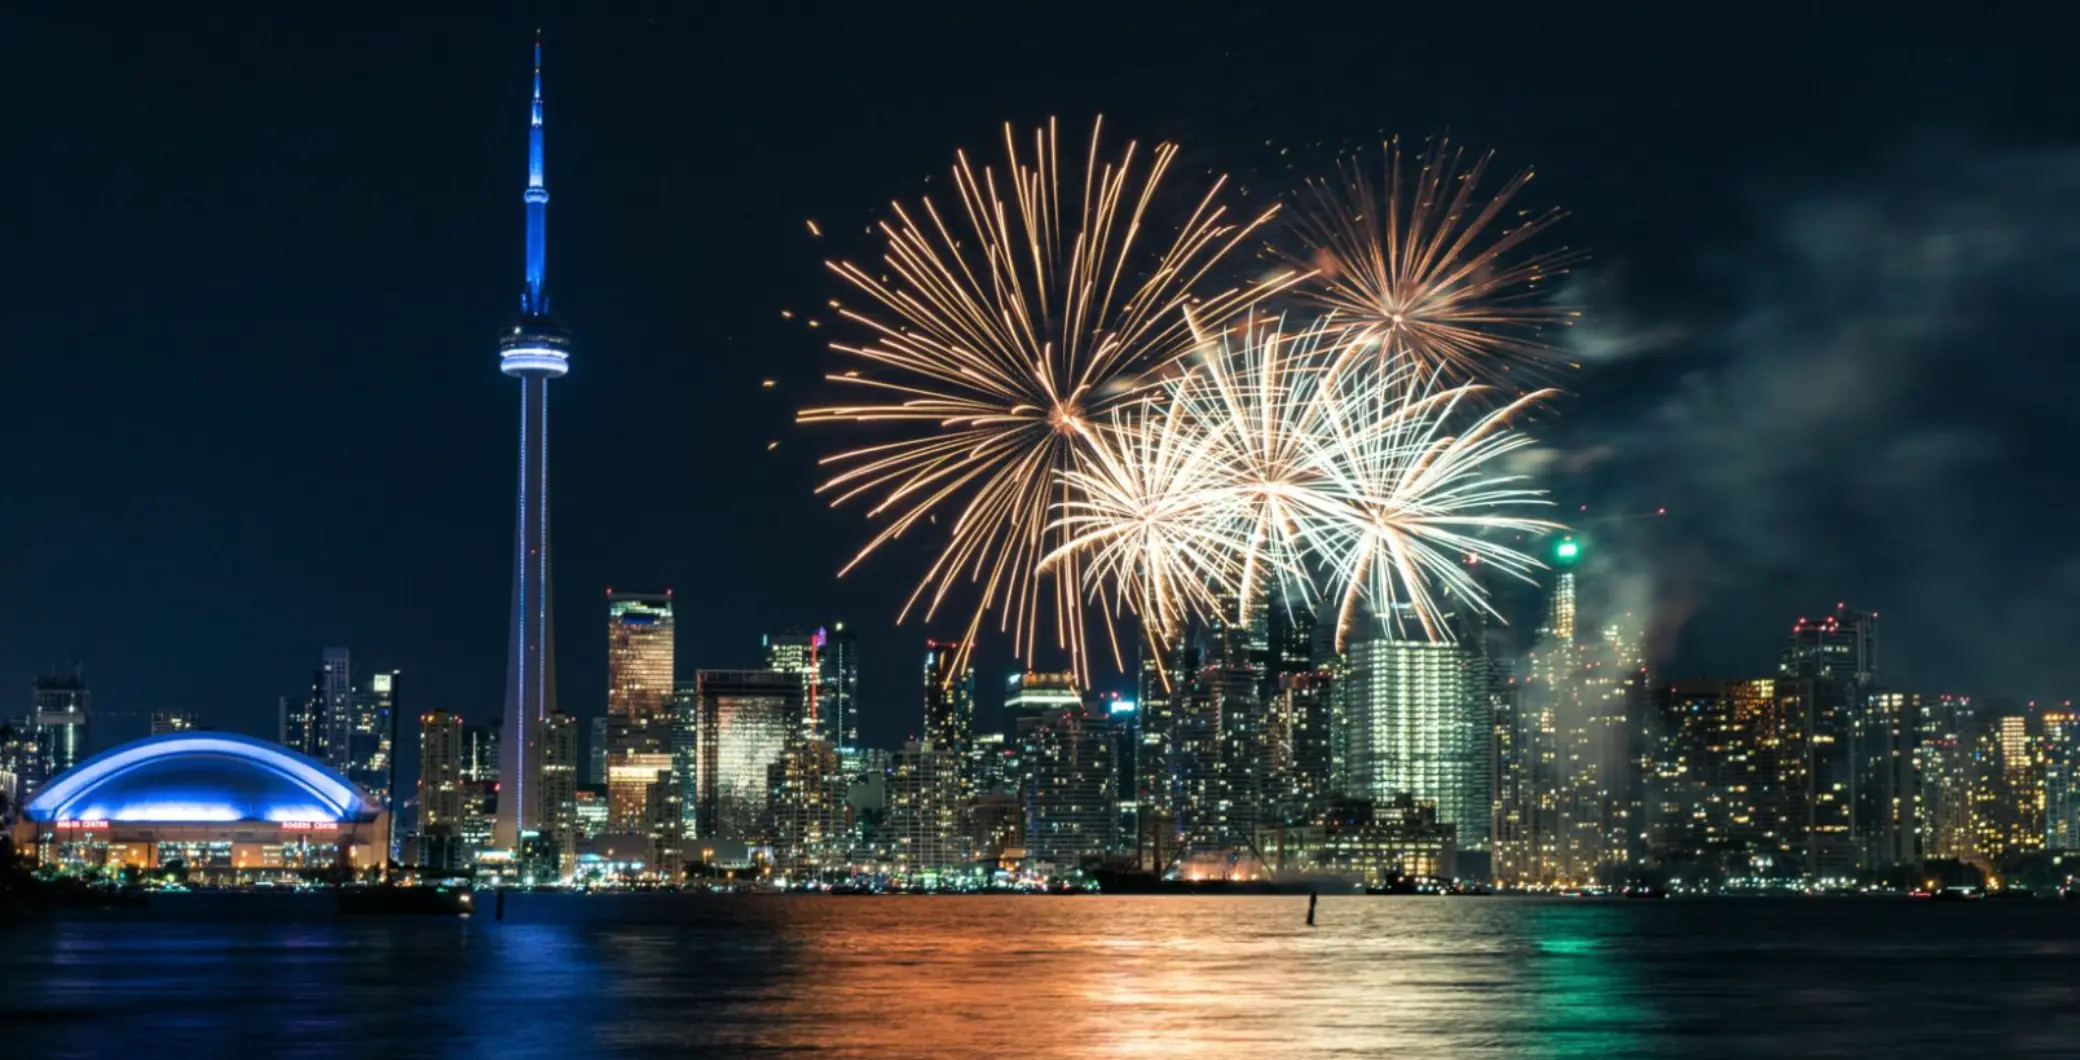 Here's how everyone can celebrate New Year's Eve in Toronto